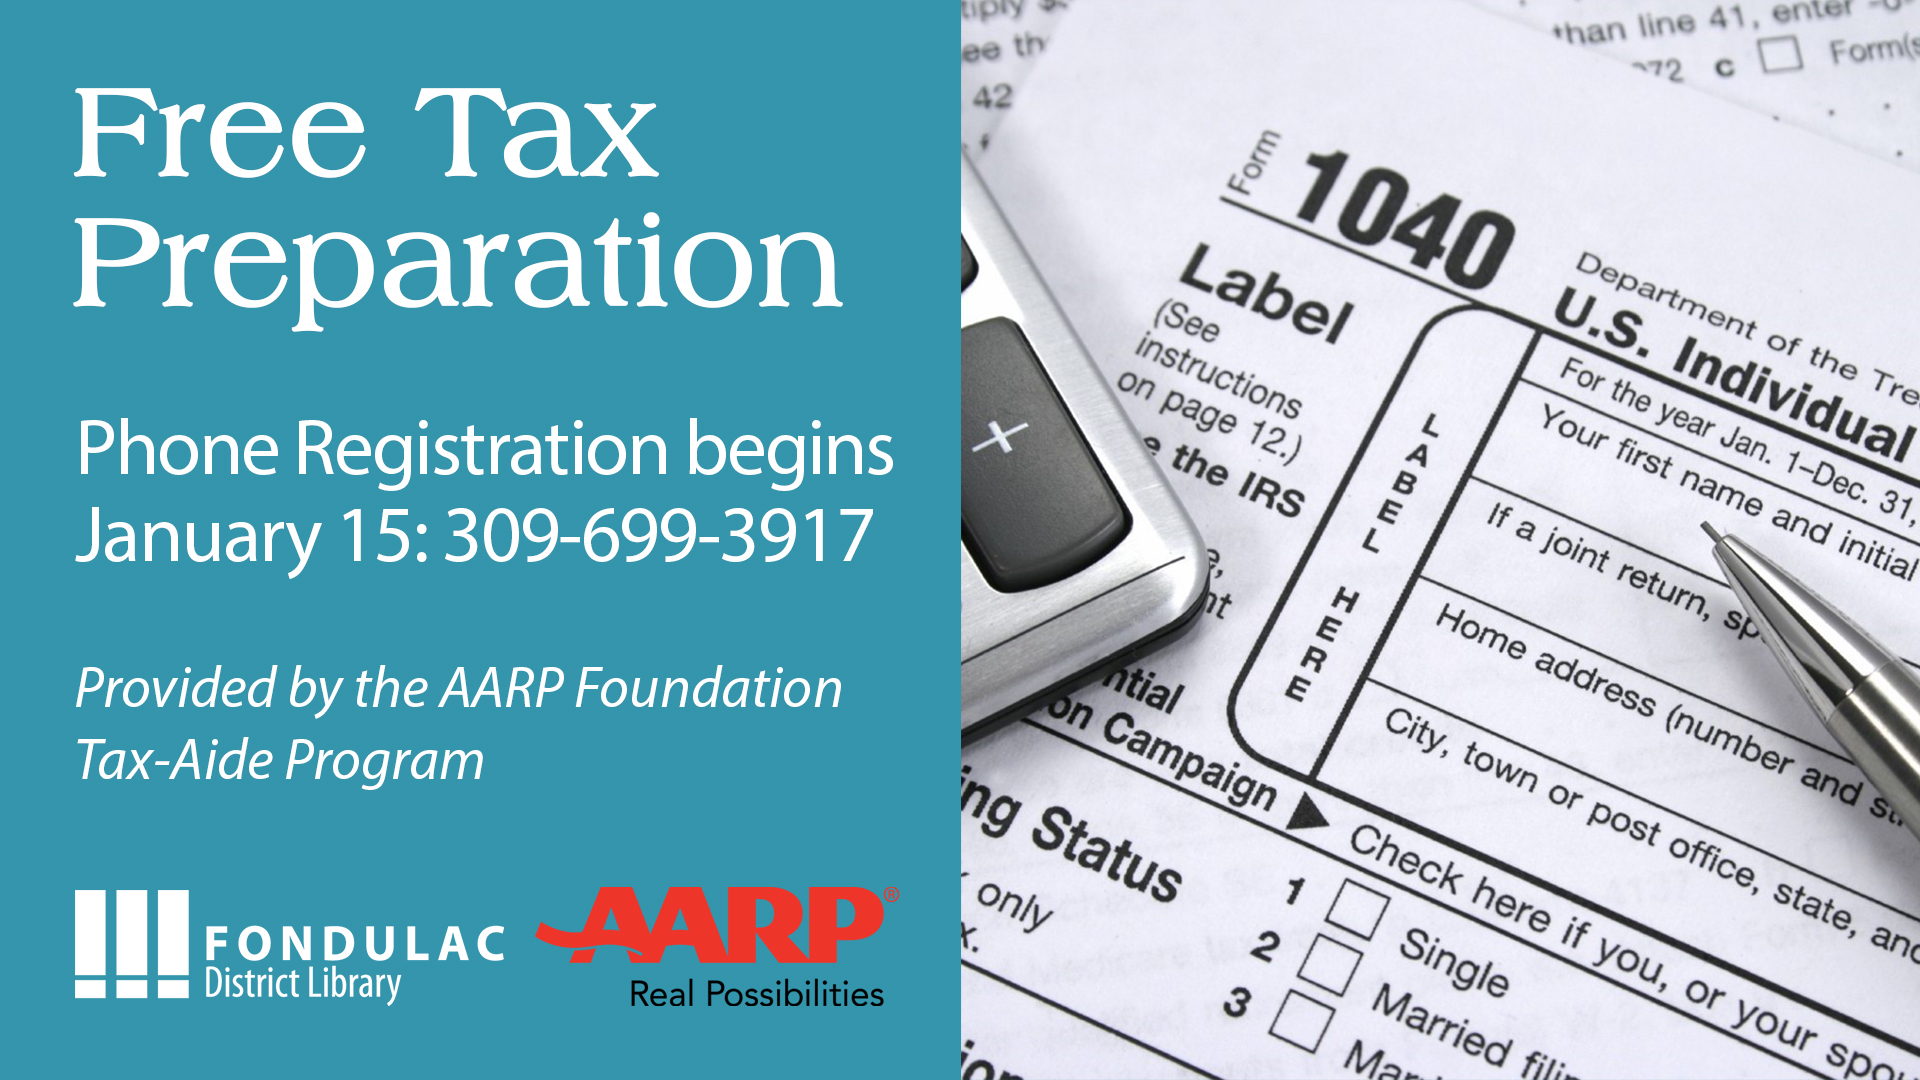 AARP Tax Preparation Assistance Fondulac District Library East